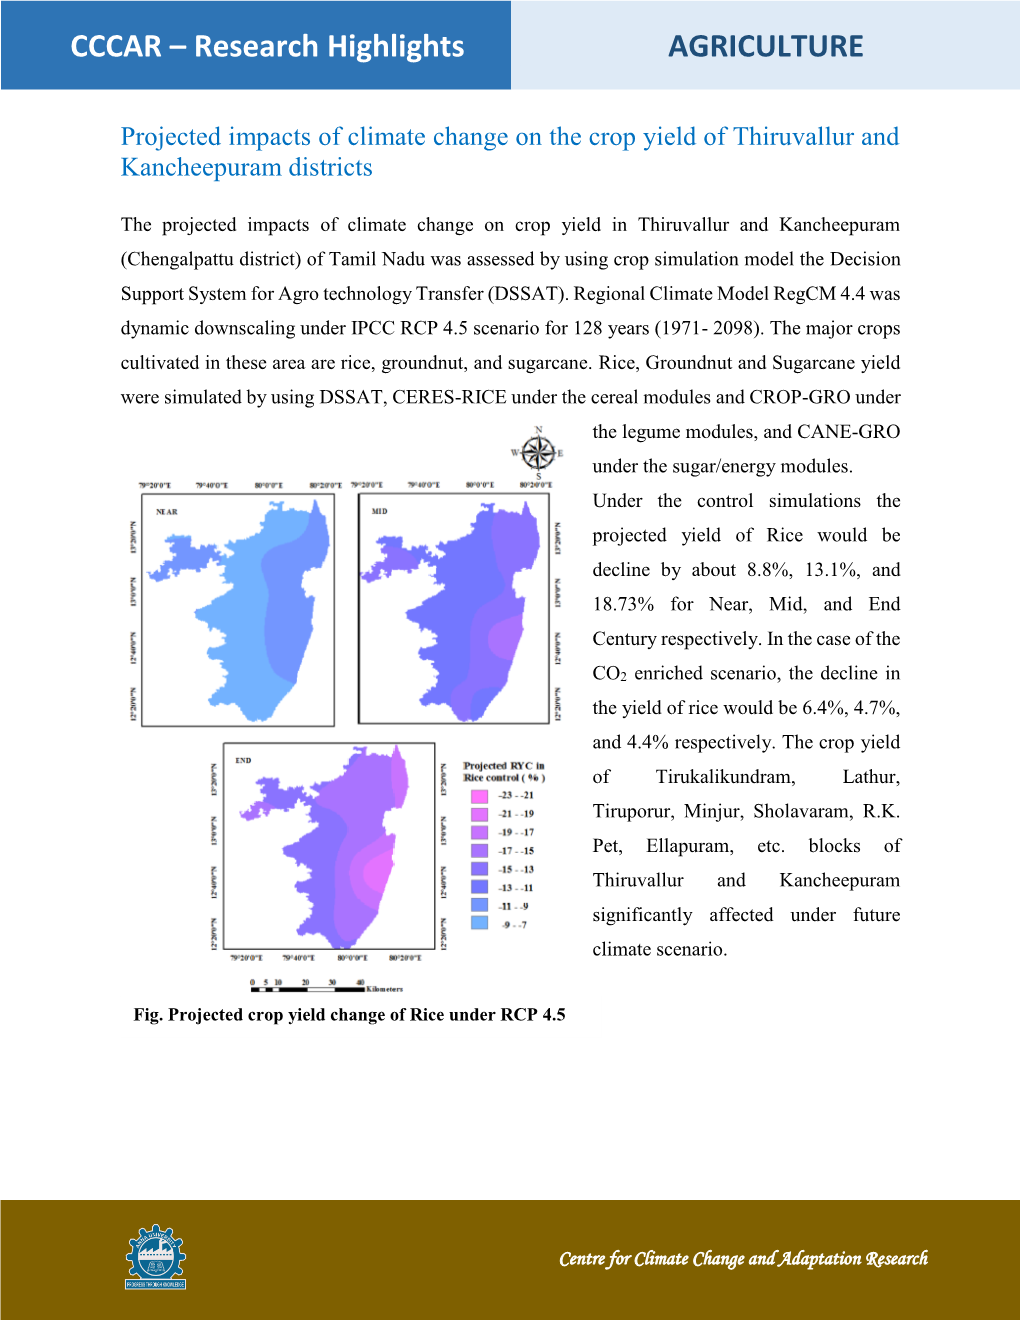 Projected Impacts of Climate Change on the Crop Yield of Thiruvallur and Kancheepuram Districts